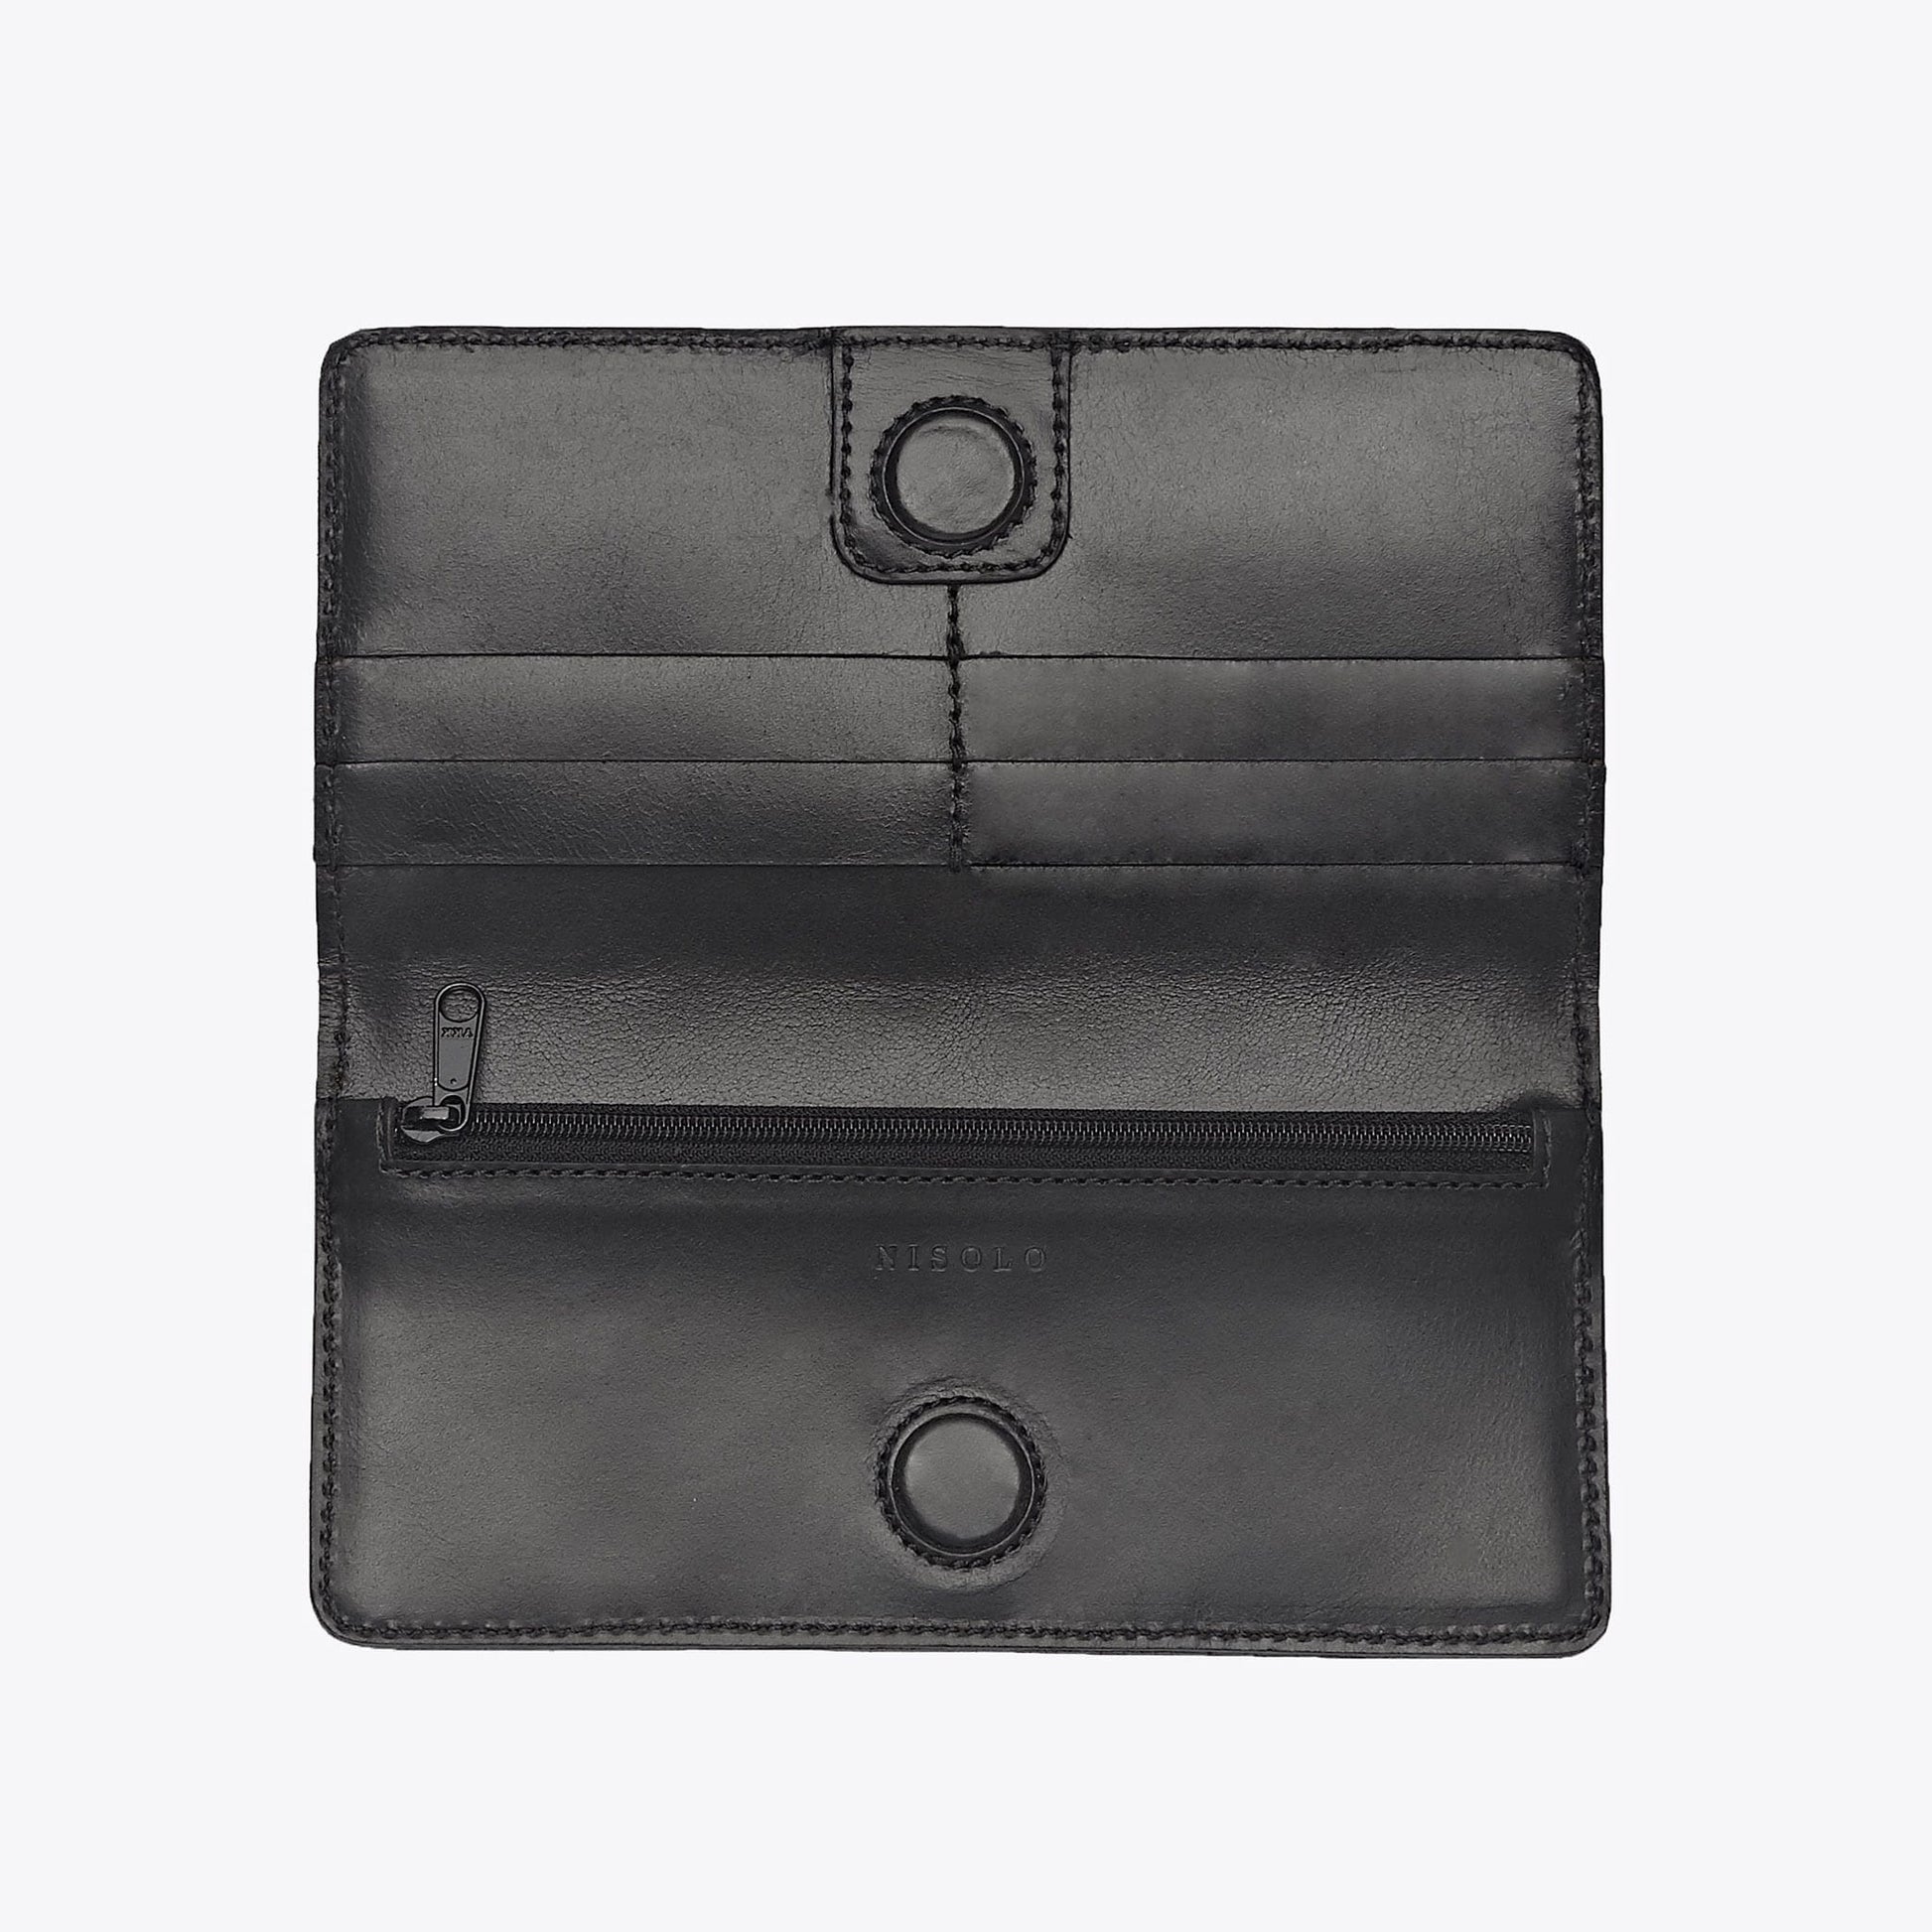 Elevated, structured, and with just enough storage for all that you actually need on hand, it’s time to upgrade and ditch that bulky wallet filled with who knows what. Internal six-card holder, Internal zipper pocket and Magnetic closure. Made sustainably by Nisolo.